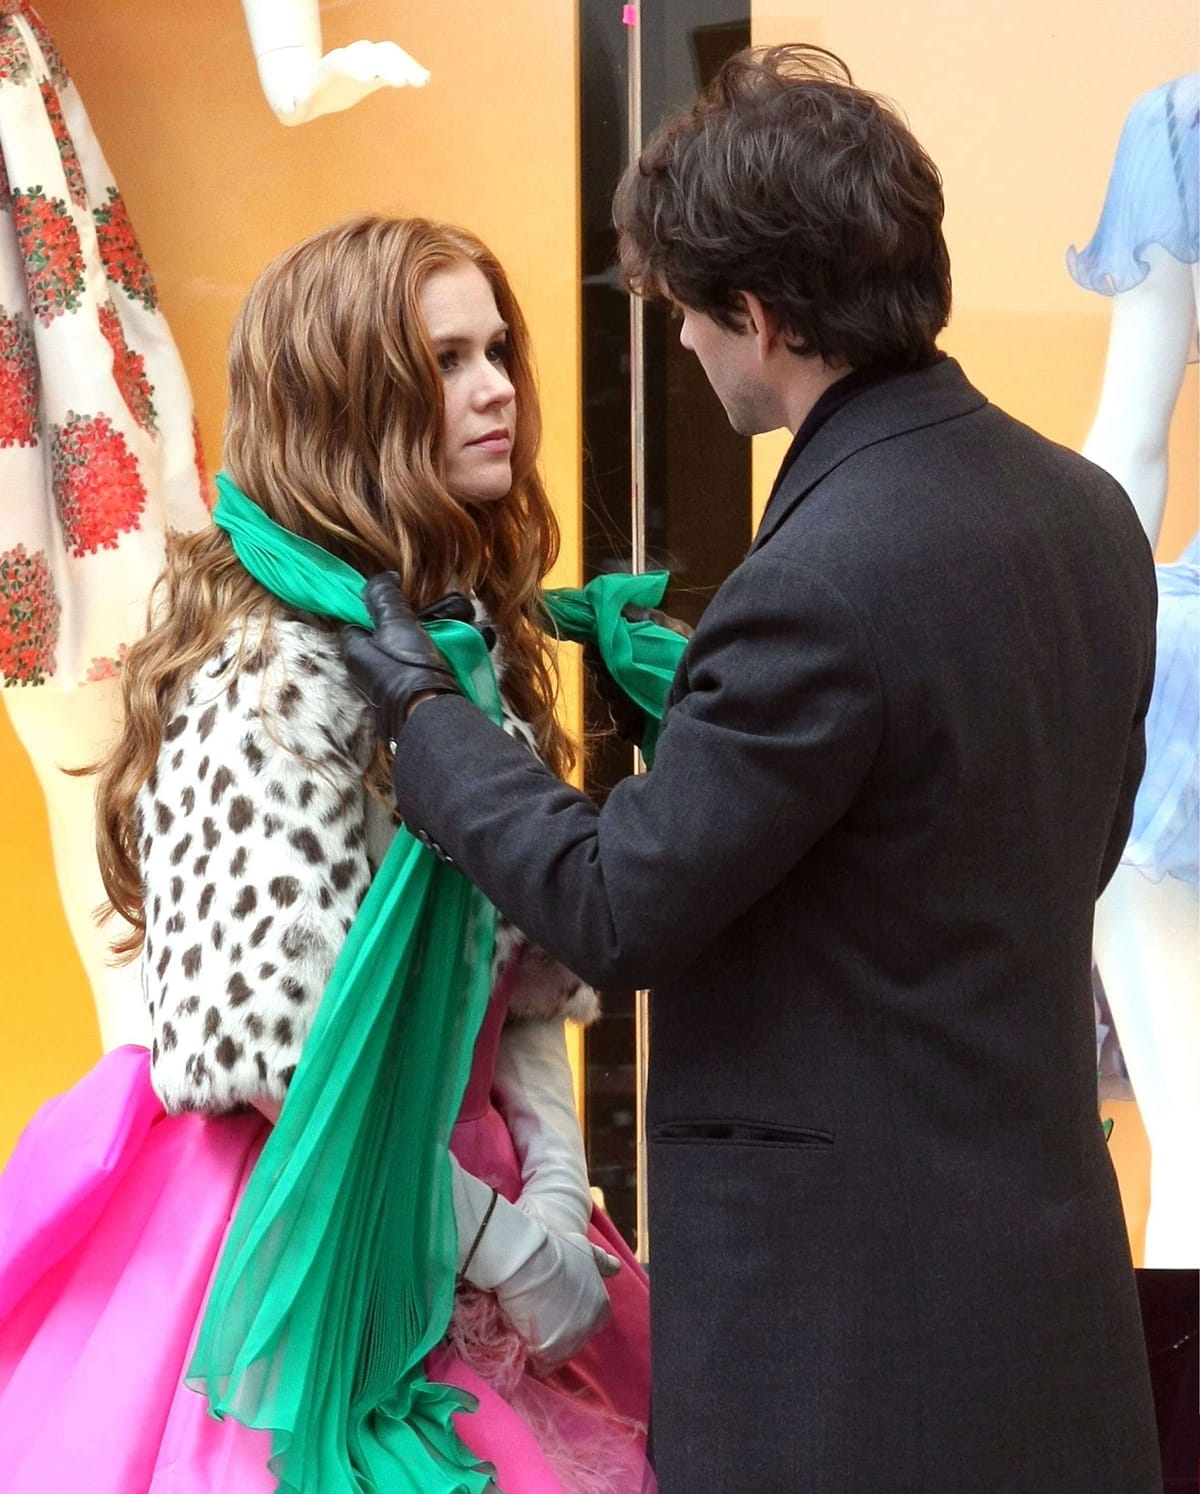 In the 2009 movie "Confessions of a Shopaholic," Isla Fisher's character Rebecca Bloomwood is often seen wearing a green scarf, which is a significant accessory that represents her love for fashion and shopping